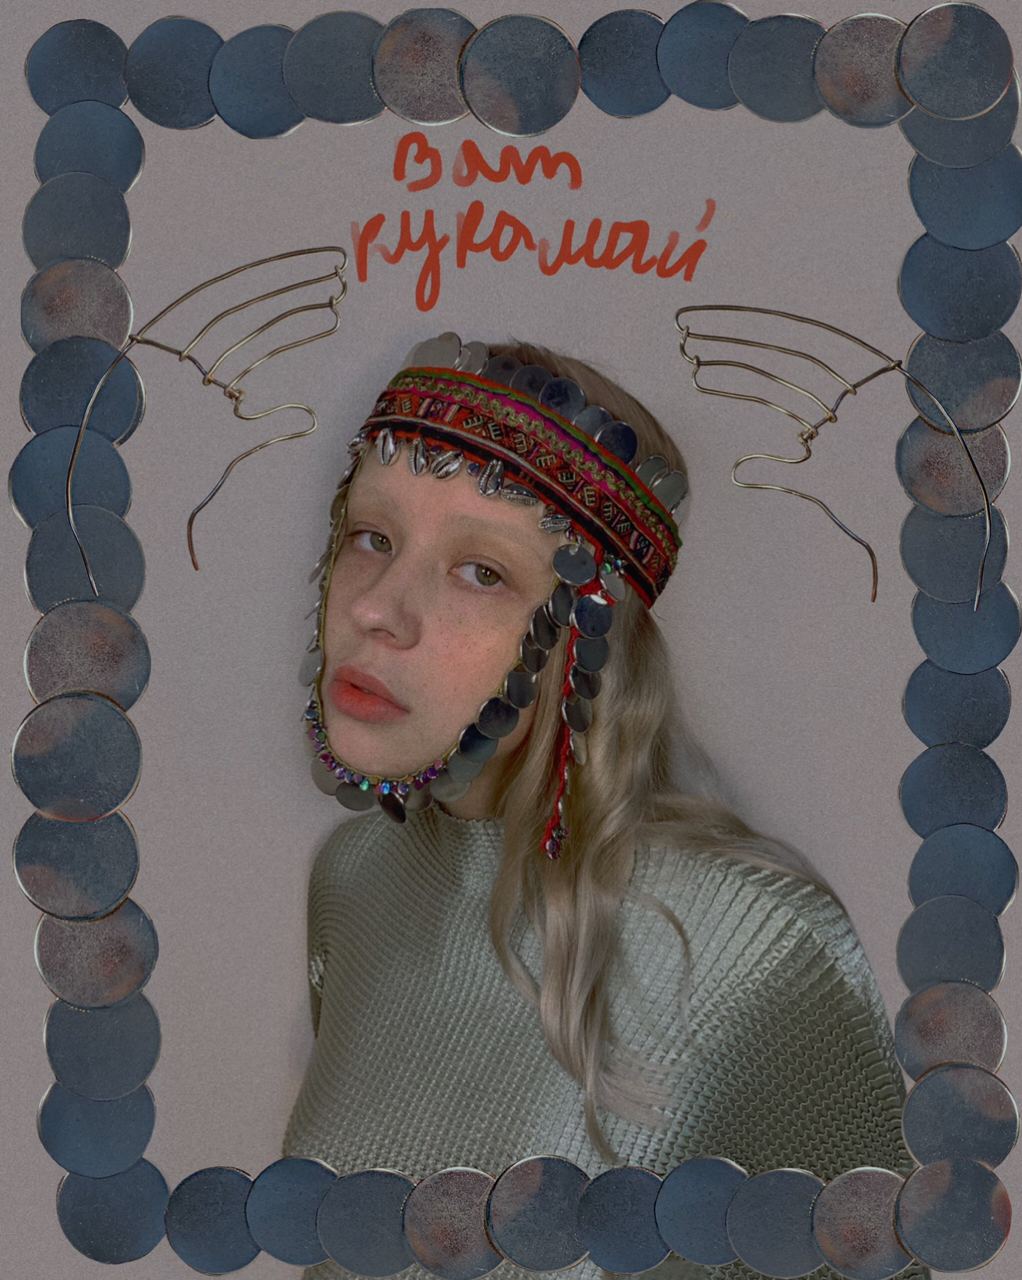 Vat Kukamai (“Great-grandmother”), 2020. In this work, Osipova is wearing a traditional Chuvash headband made by her great-grandmother. The embroidery has a symbolic meaning and represents heaven and rainbow 